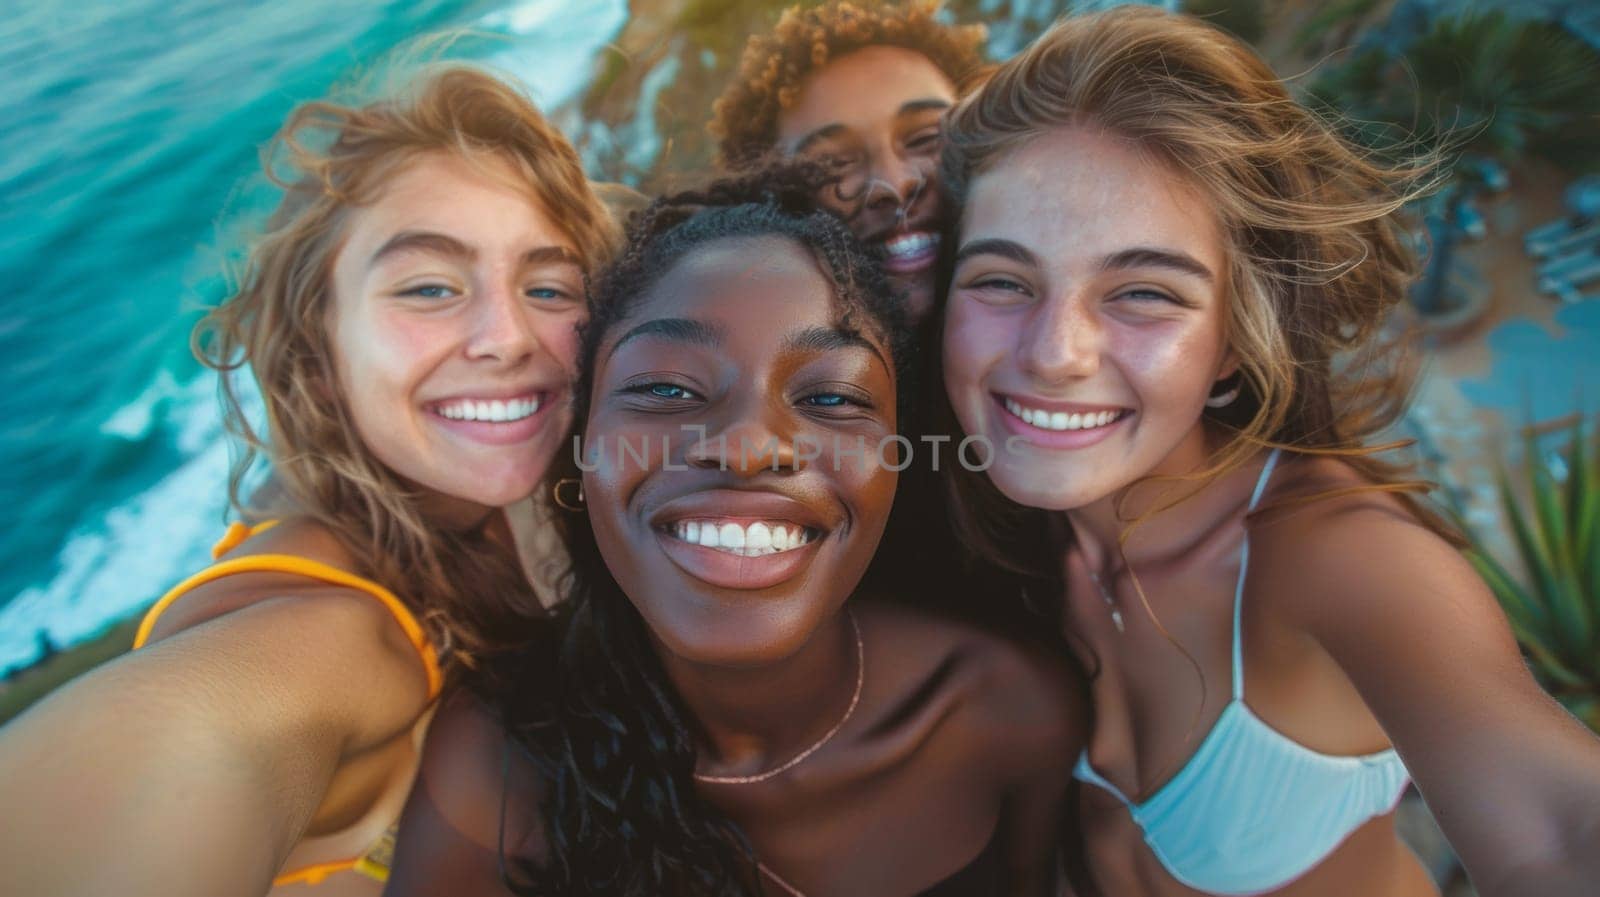 A group of four young women taking a selfie together